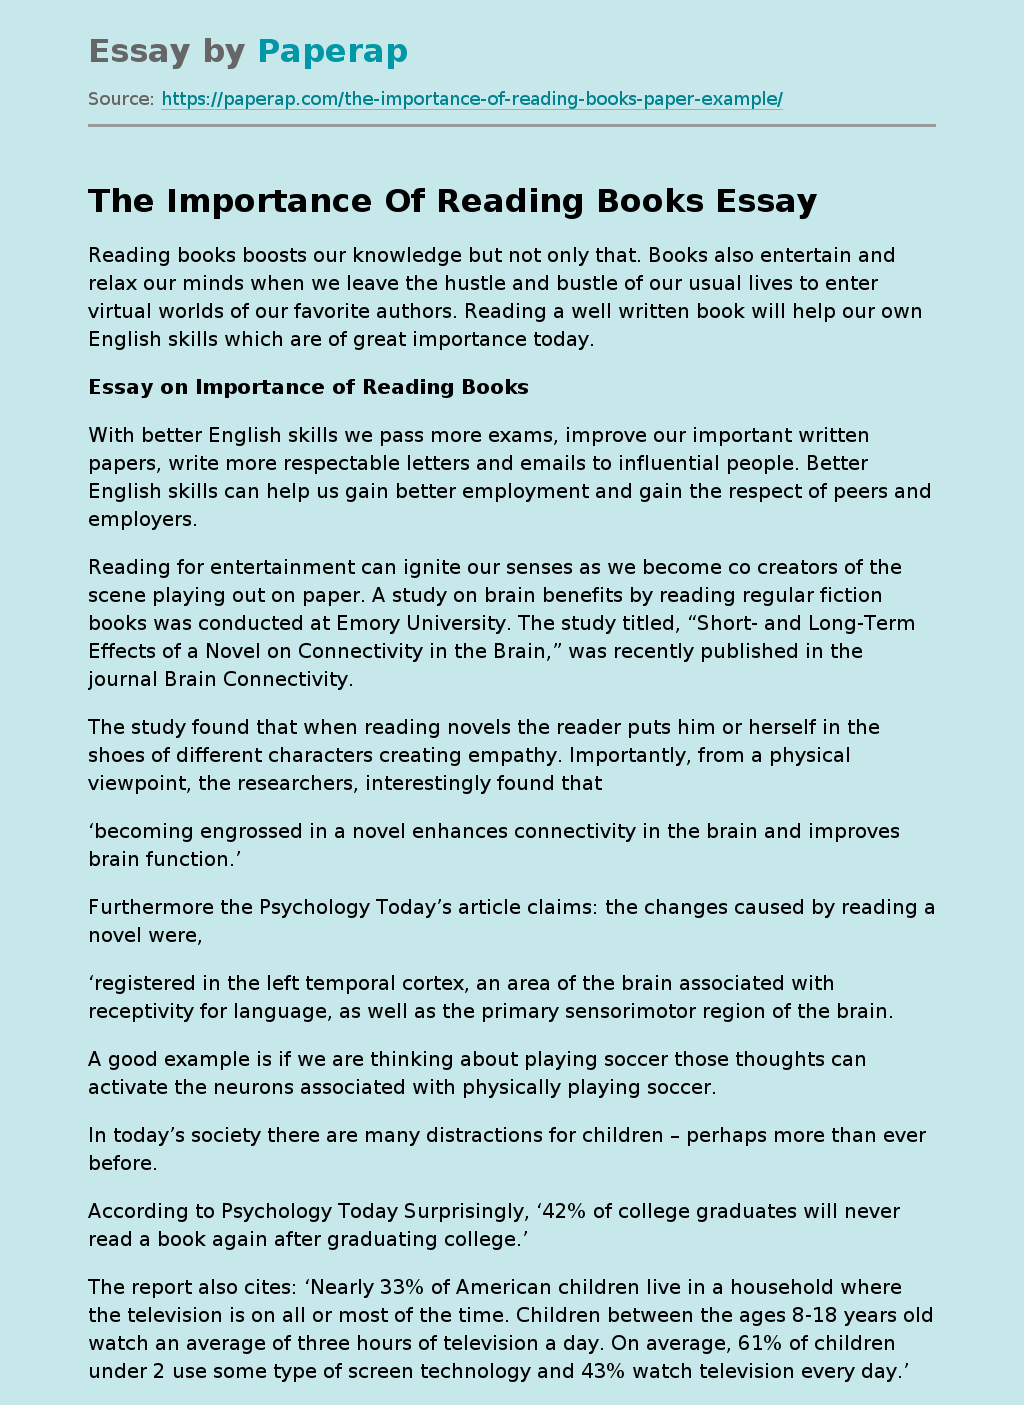 The Importance Of Reading Books